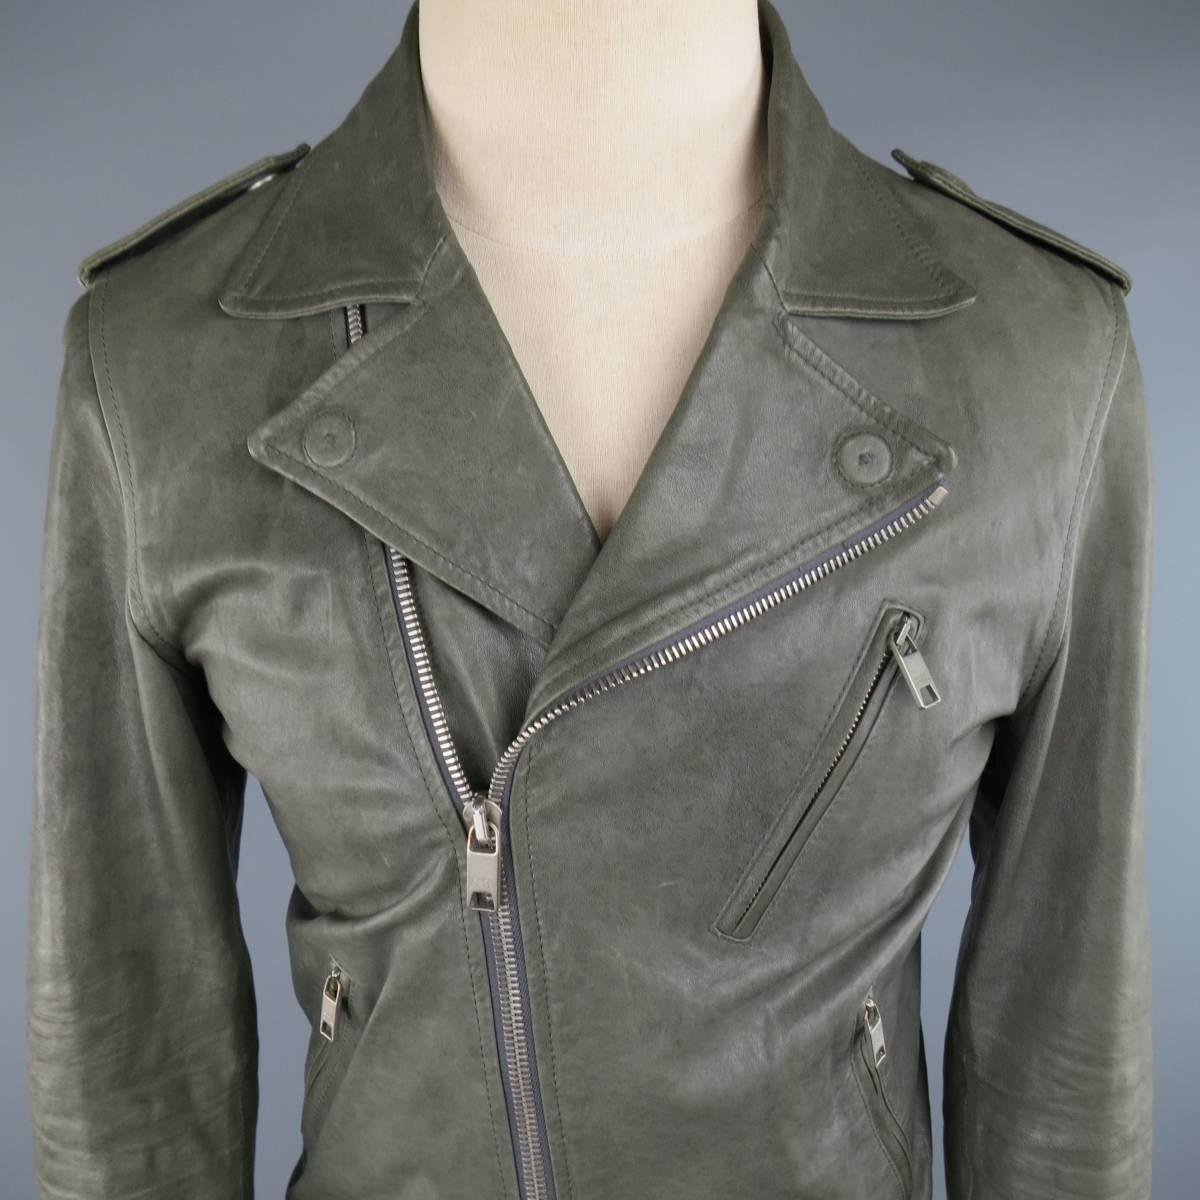 MARC JACOBS biker jacket in a distressed washed look leather featuring a pointed lapel, zip closure, epaulets with hidden snap closure, slanted zip pockets, zip cuffs and heather gray jersey liner. Wear throughout and minor smoke smell. As-Is. Made